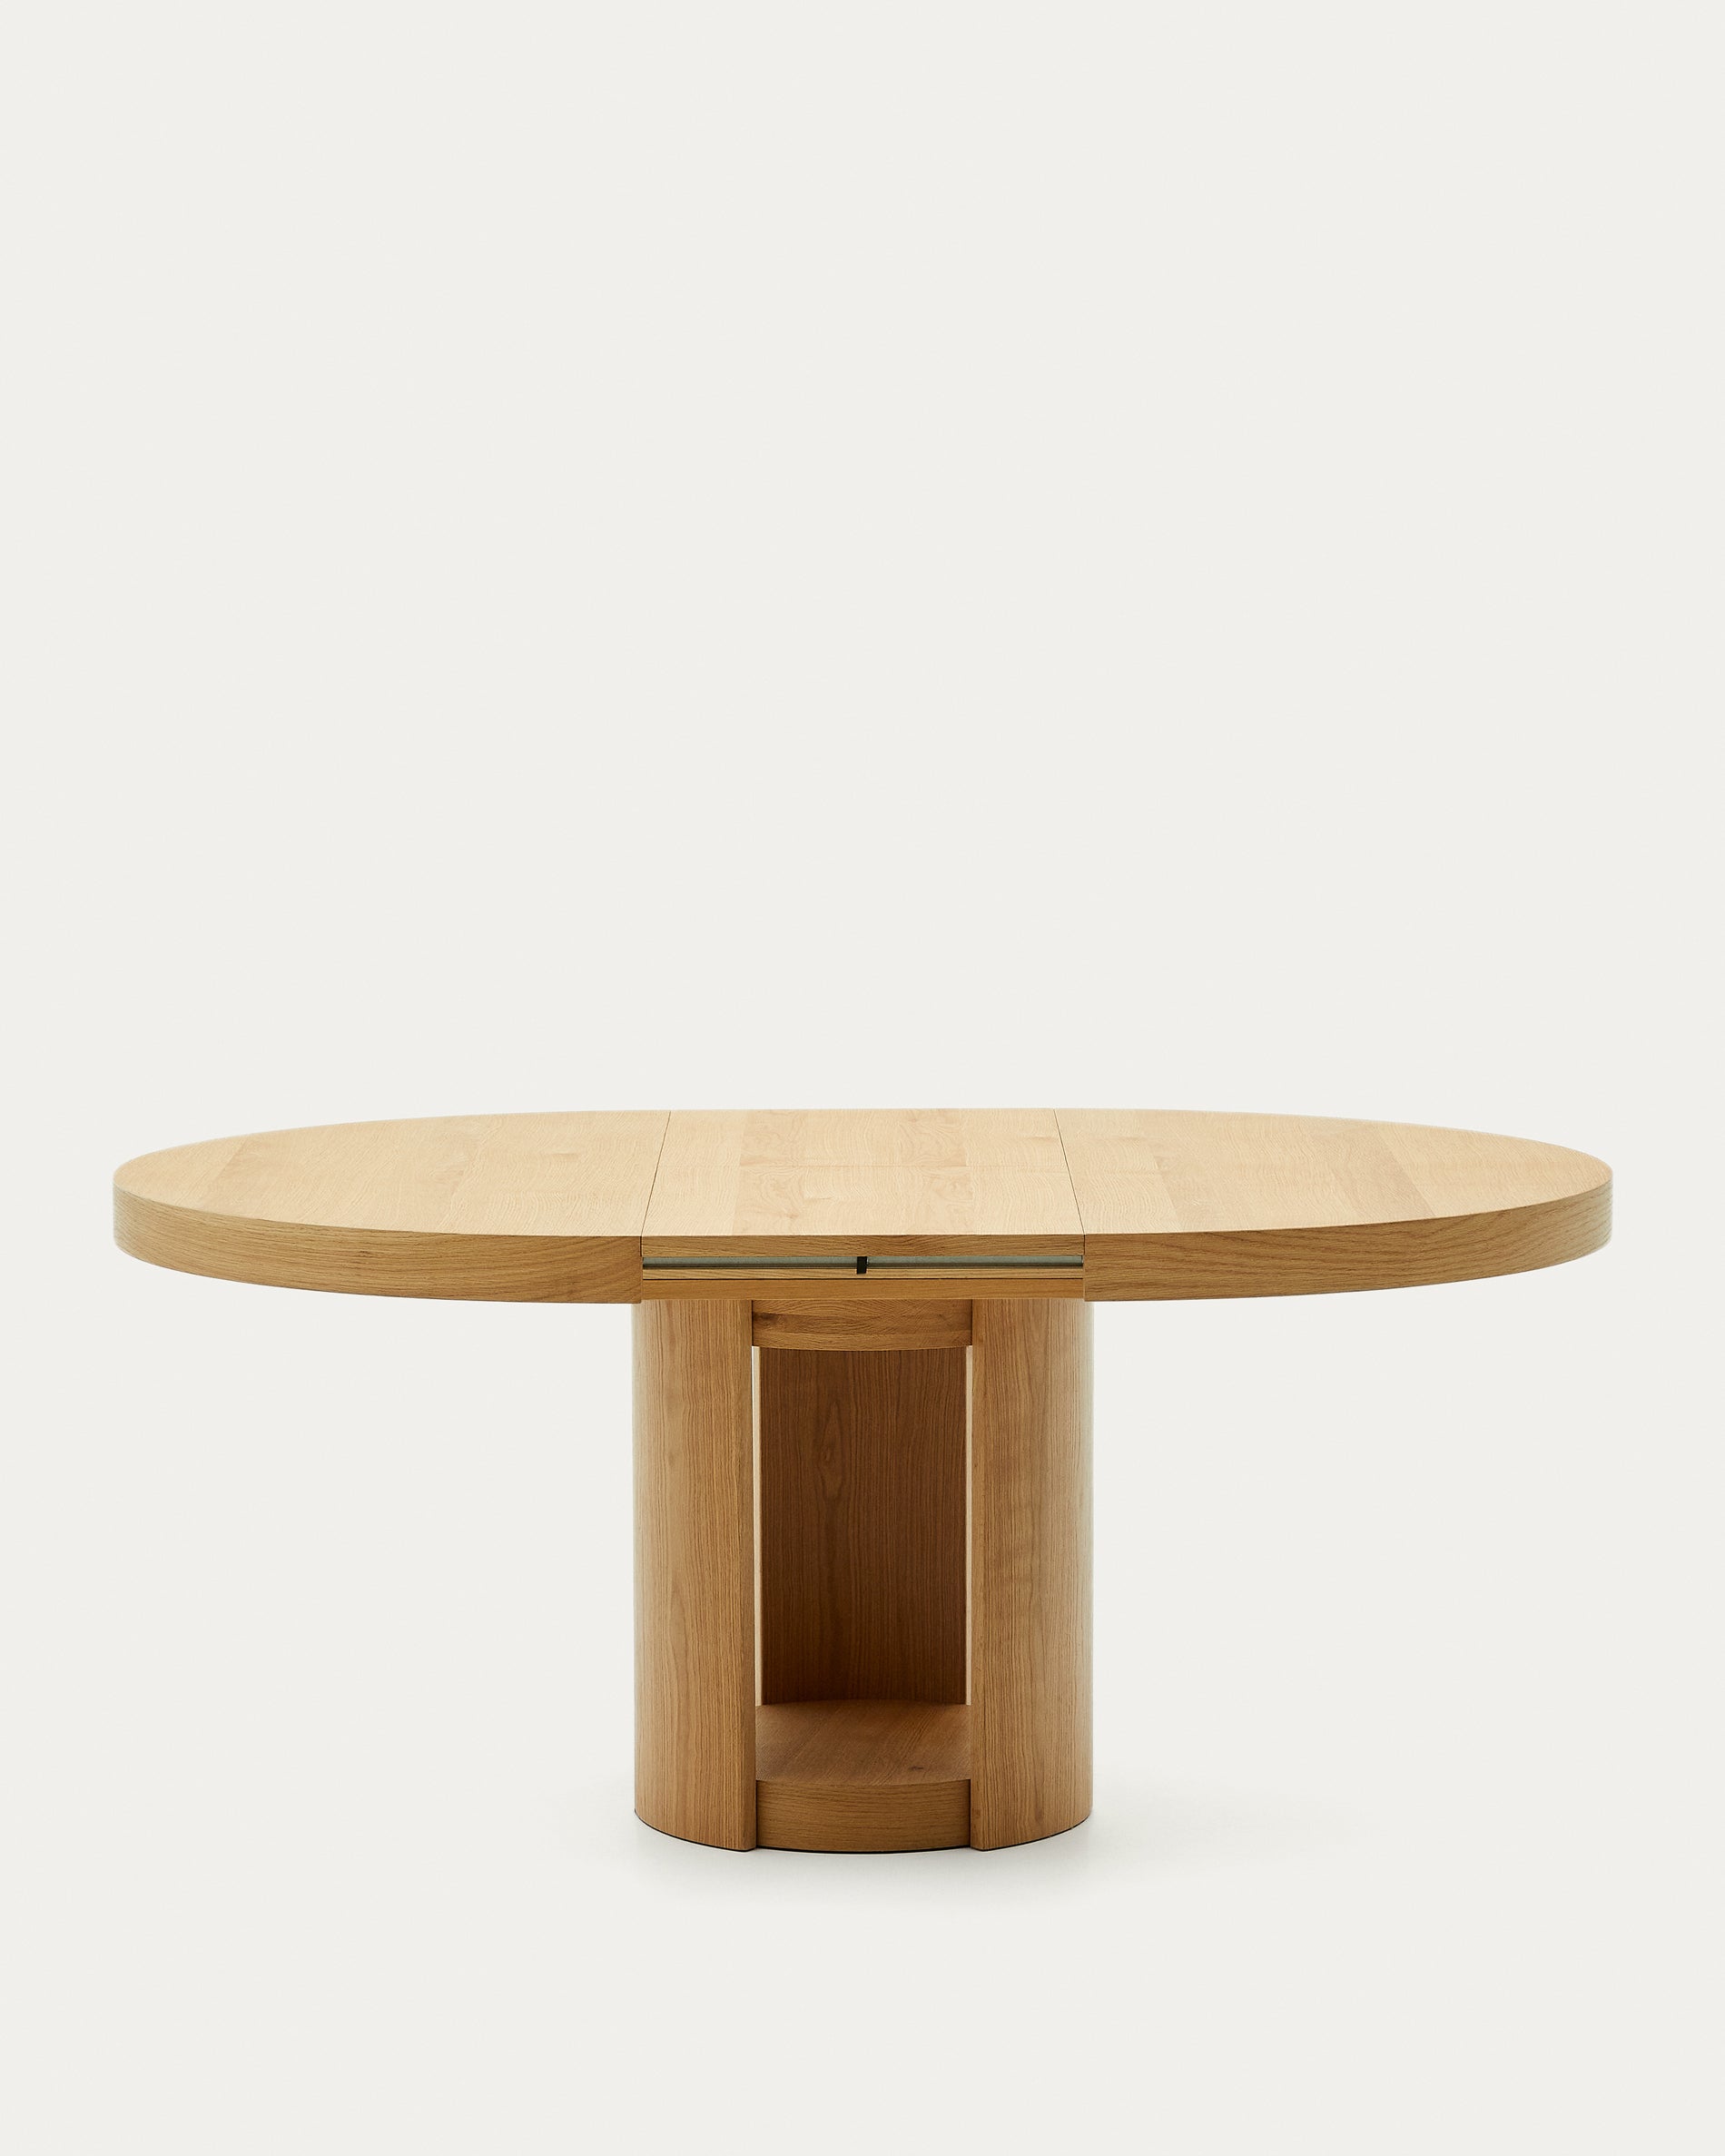 Artis extendable round table in solid oak and veneer, 100% FSC, 150 (200) cm x 80 cm